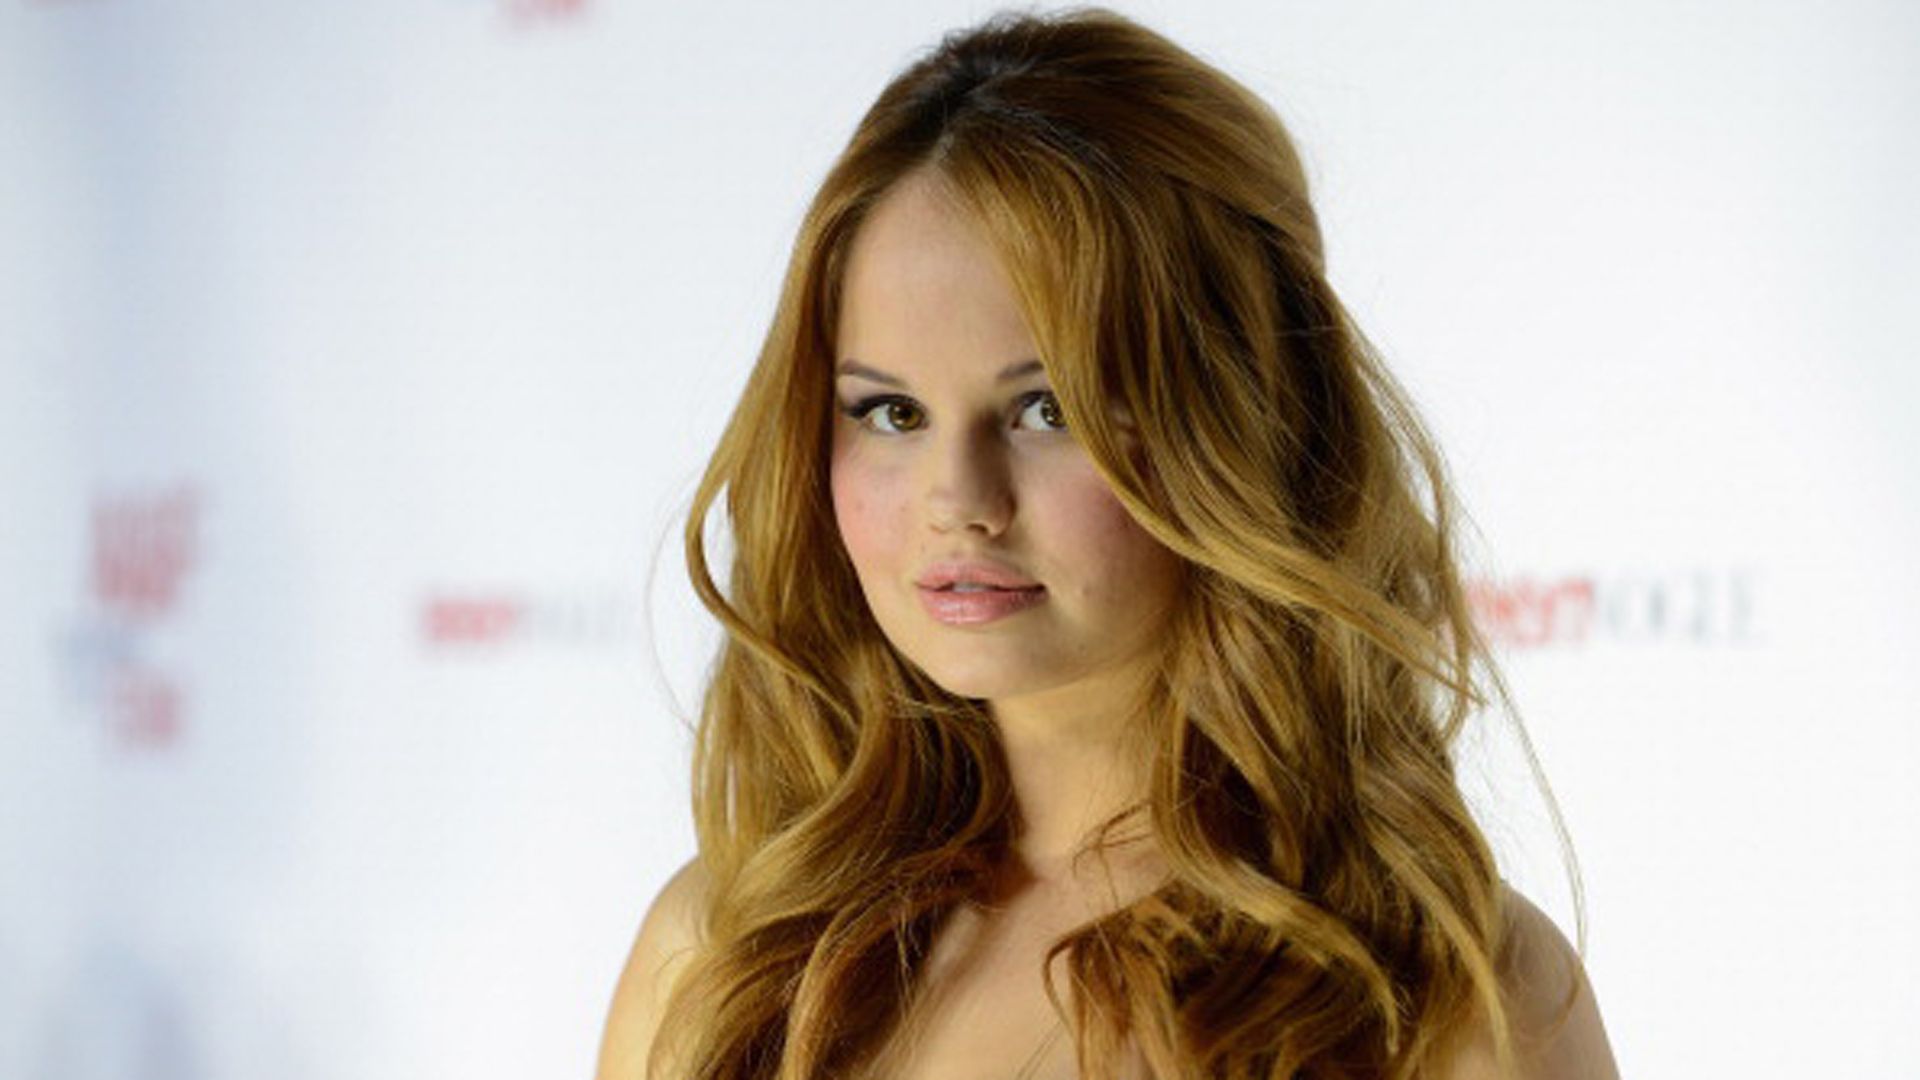 Disney Channel 'Jessie' Actress Debby Ryan Arrested, Charged With DUI After Crashing Audi